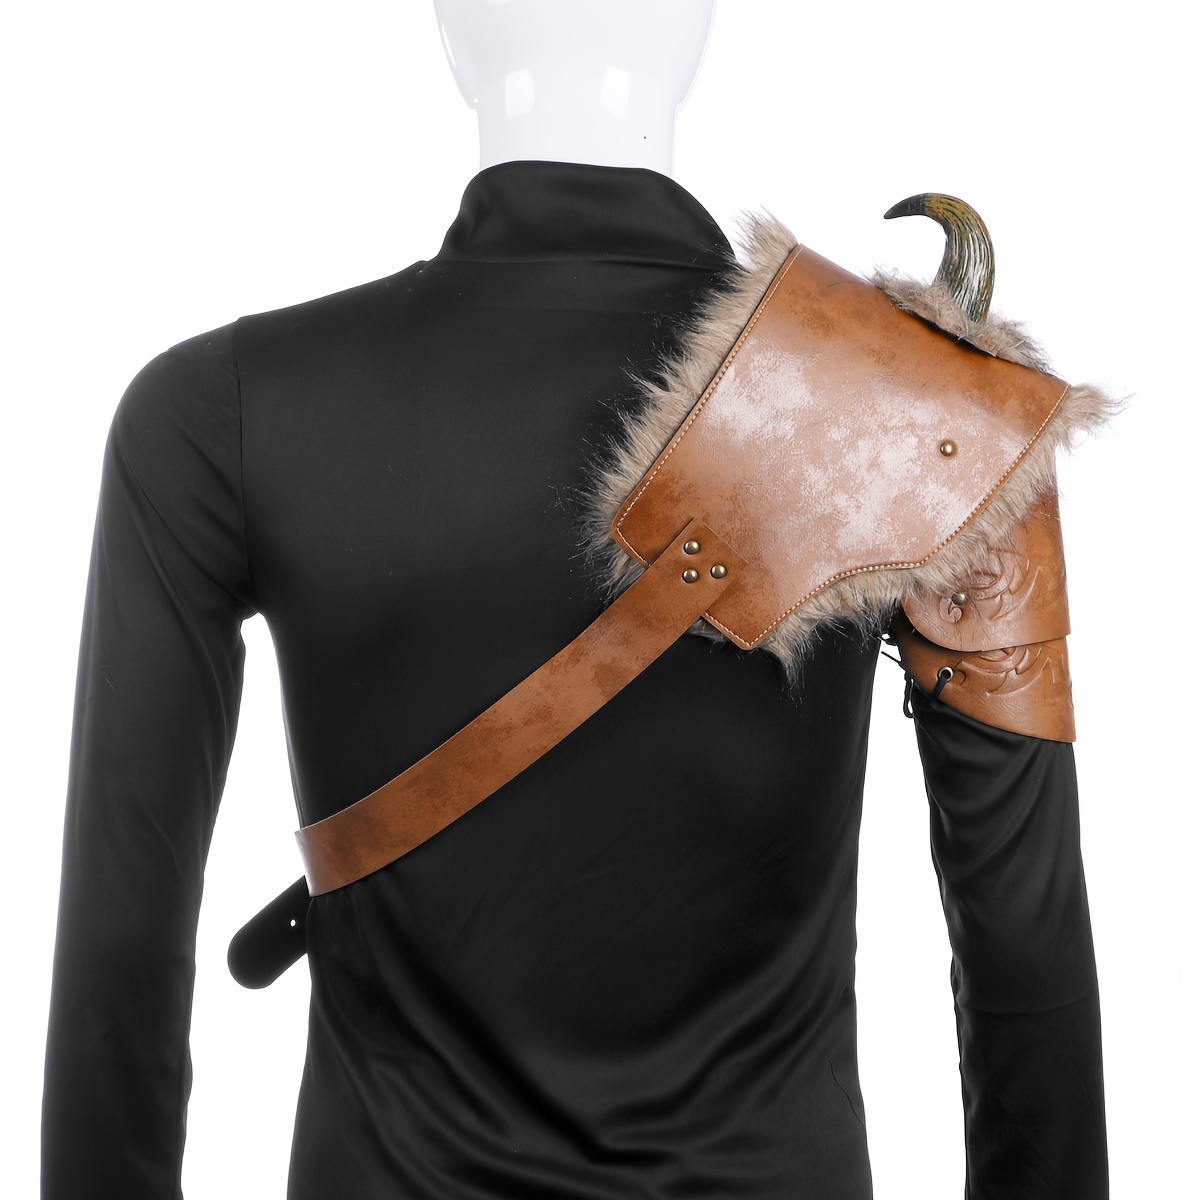 This item is unavailable -   Viking armor, Leather armor, Medieval  armor